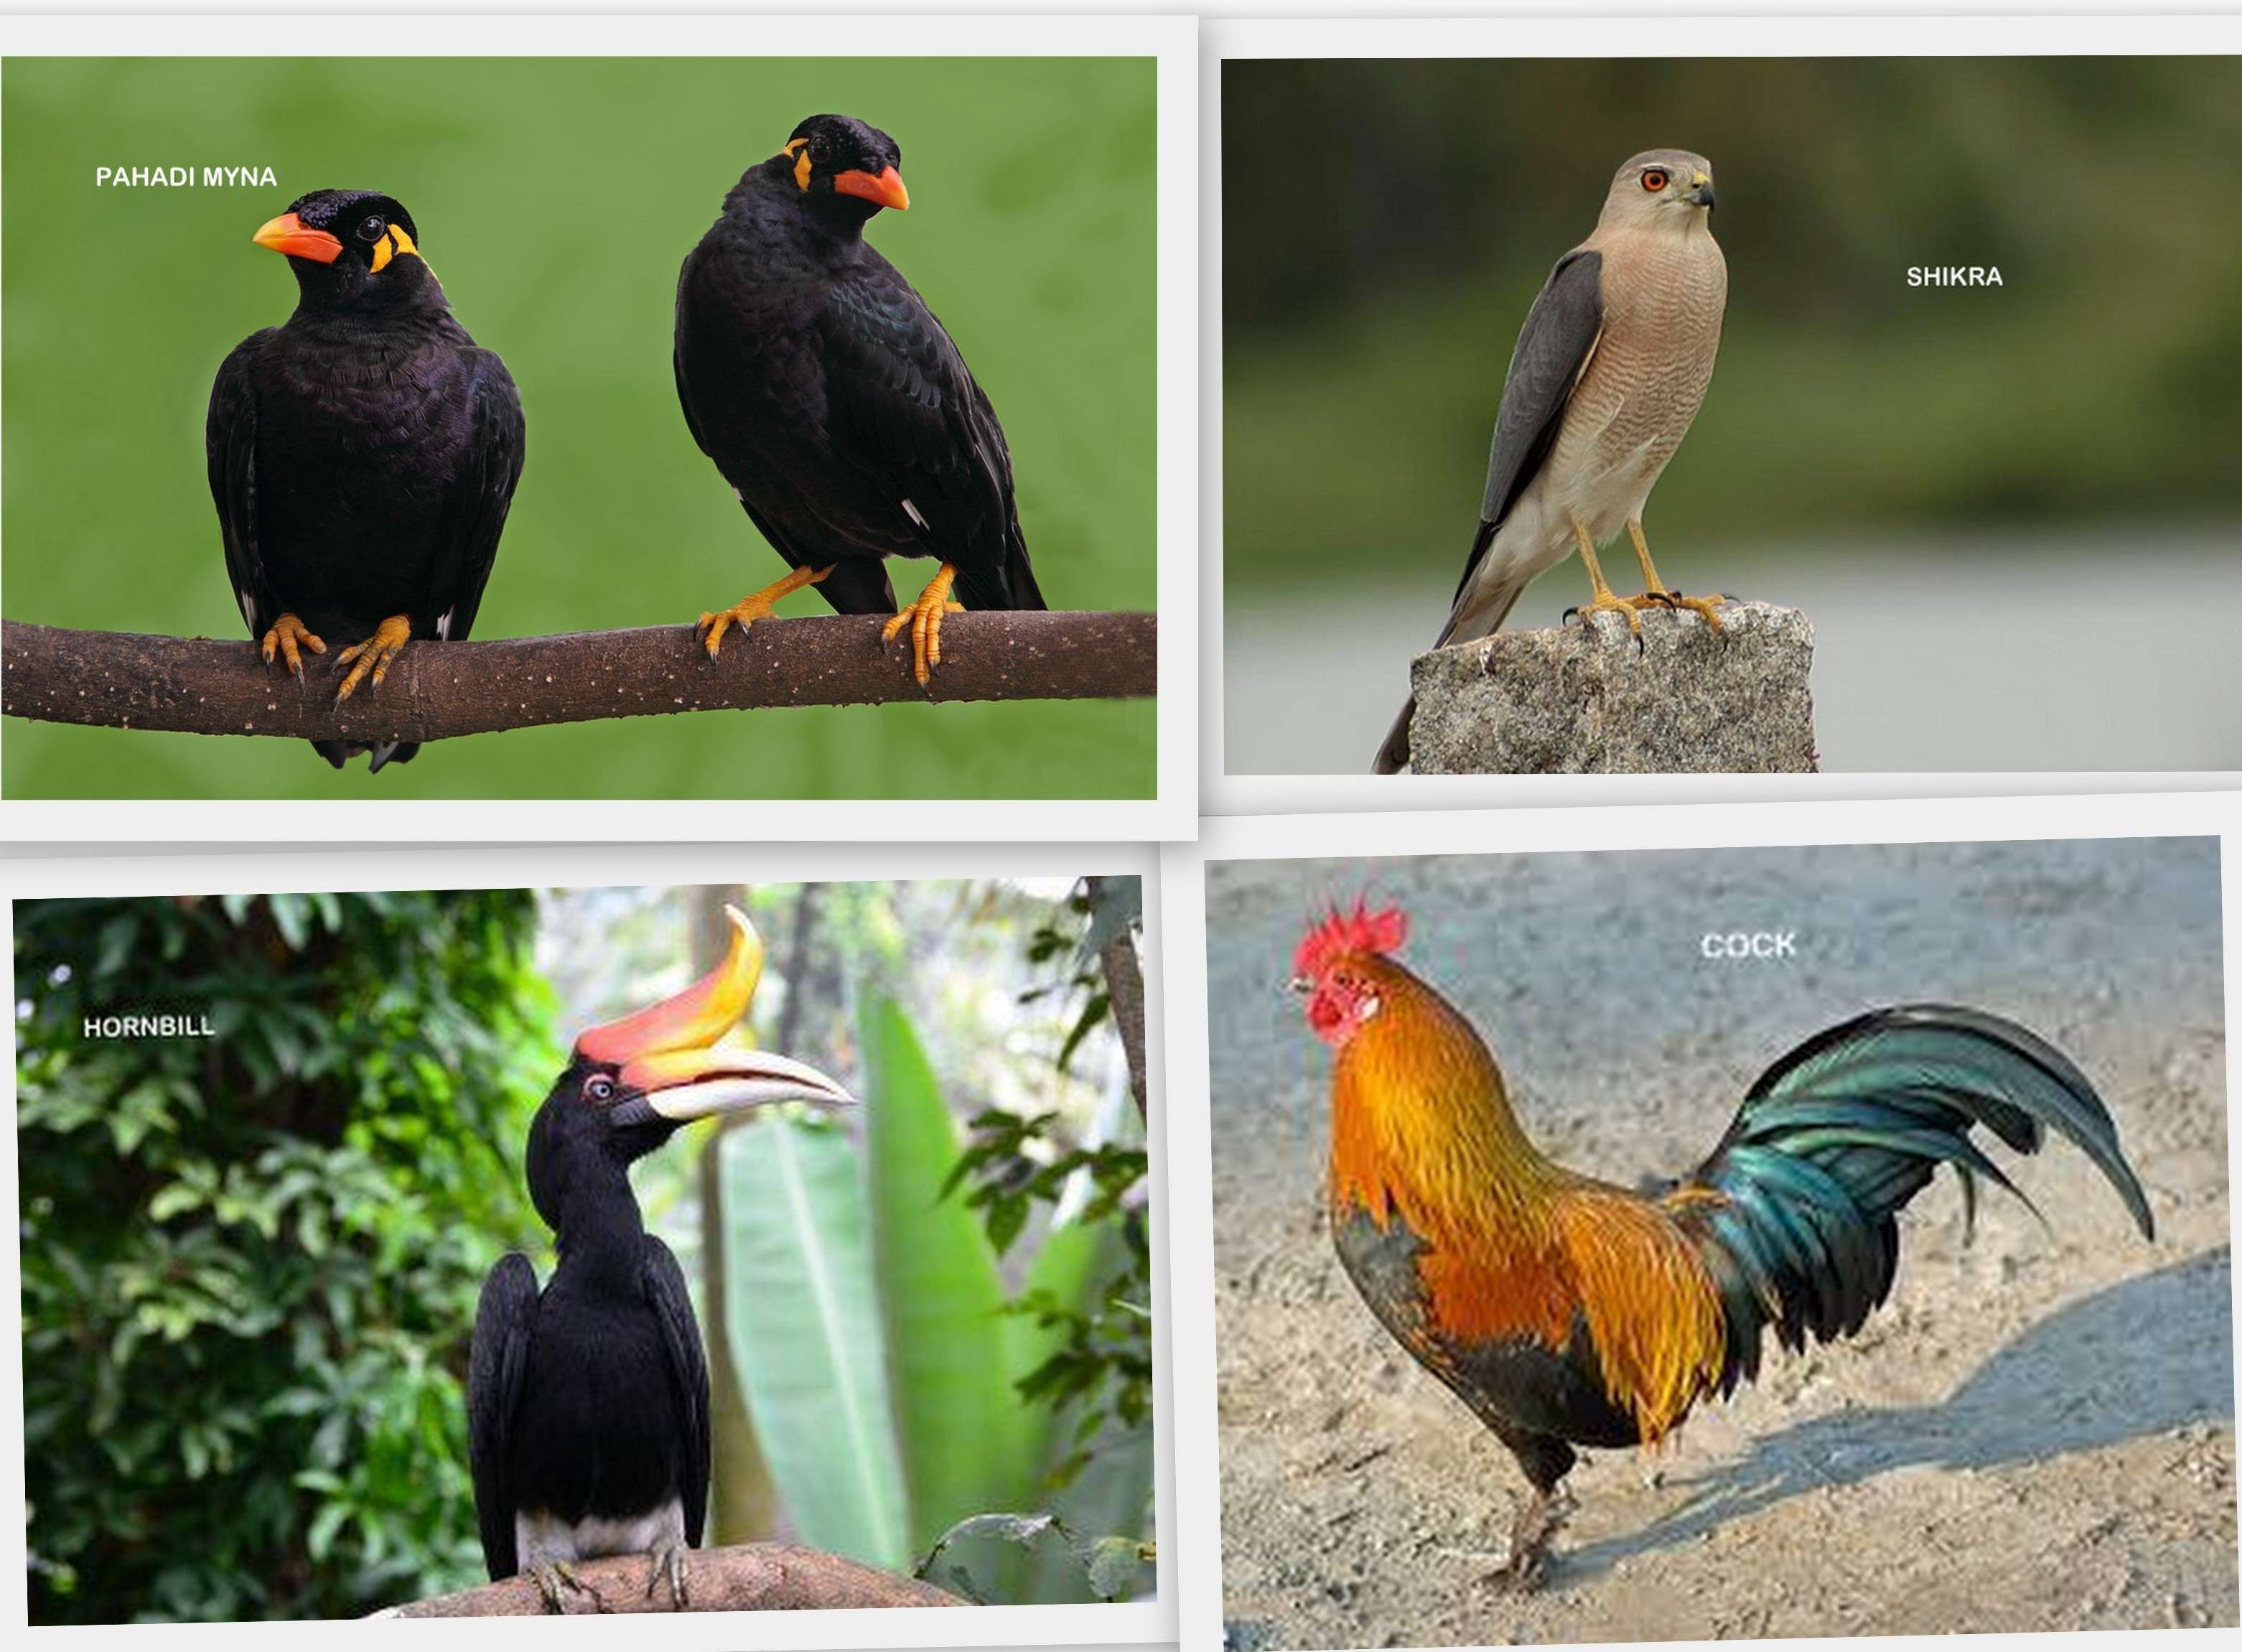 “Flap flap”-First ever Bird Park to be made in Udaipur